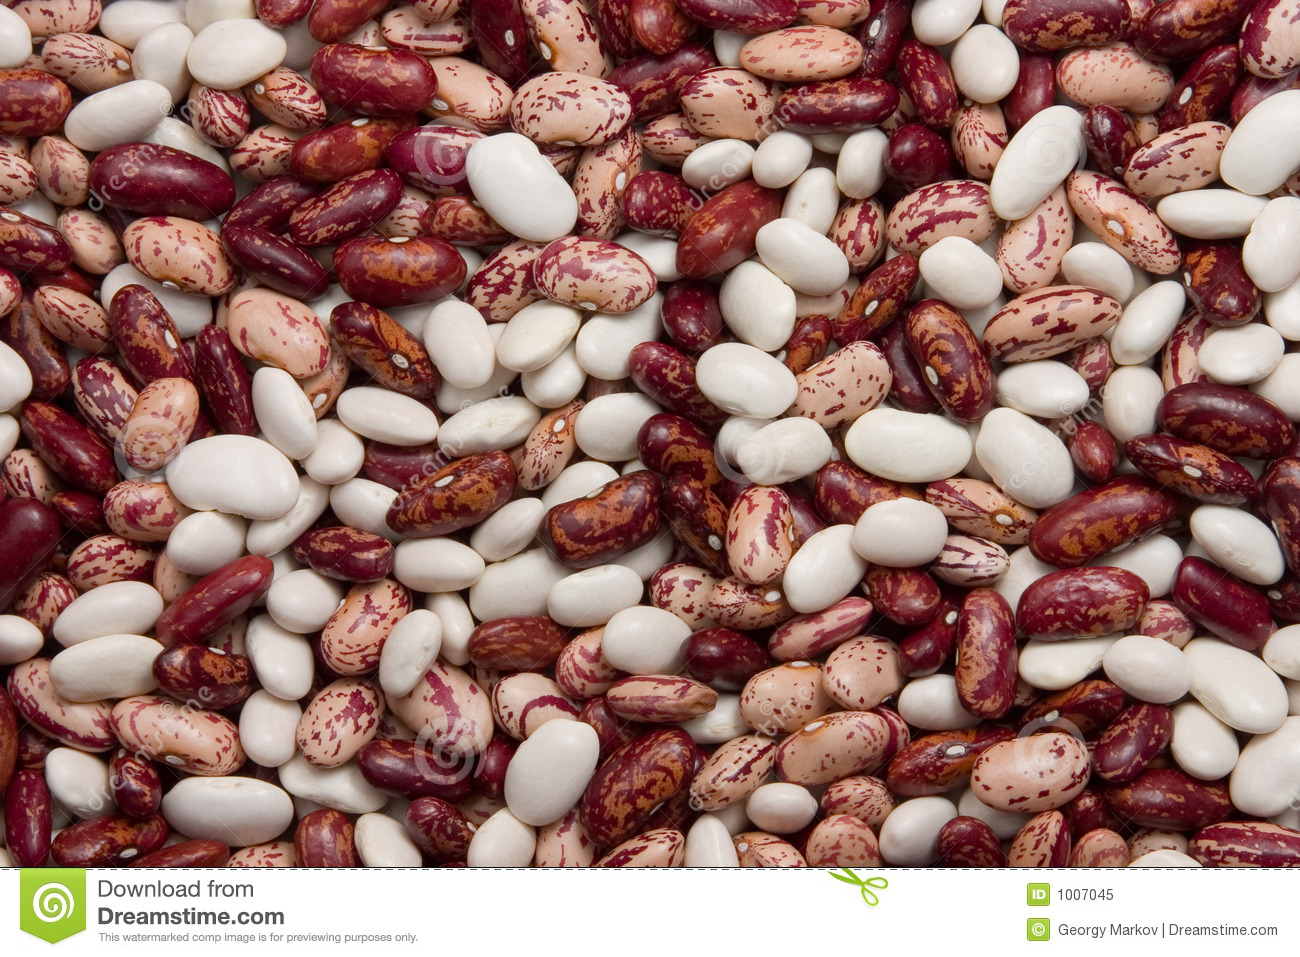 Mixed Kidney Beans Royalty Free Stock Photo   Image  1007045